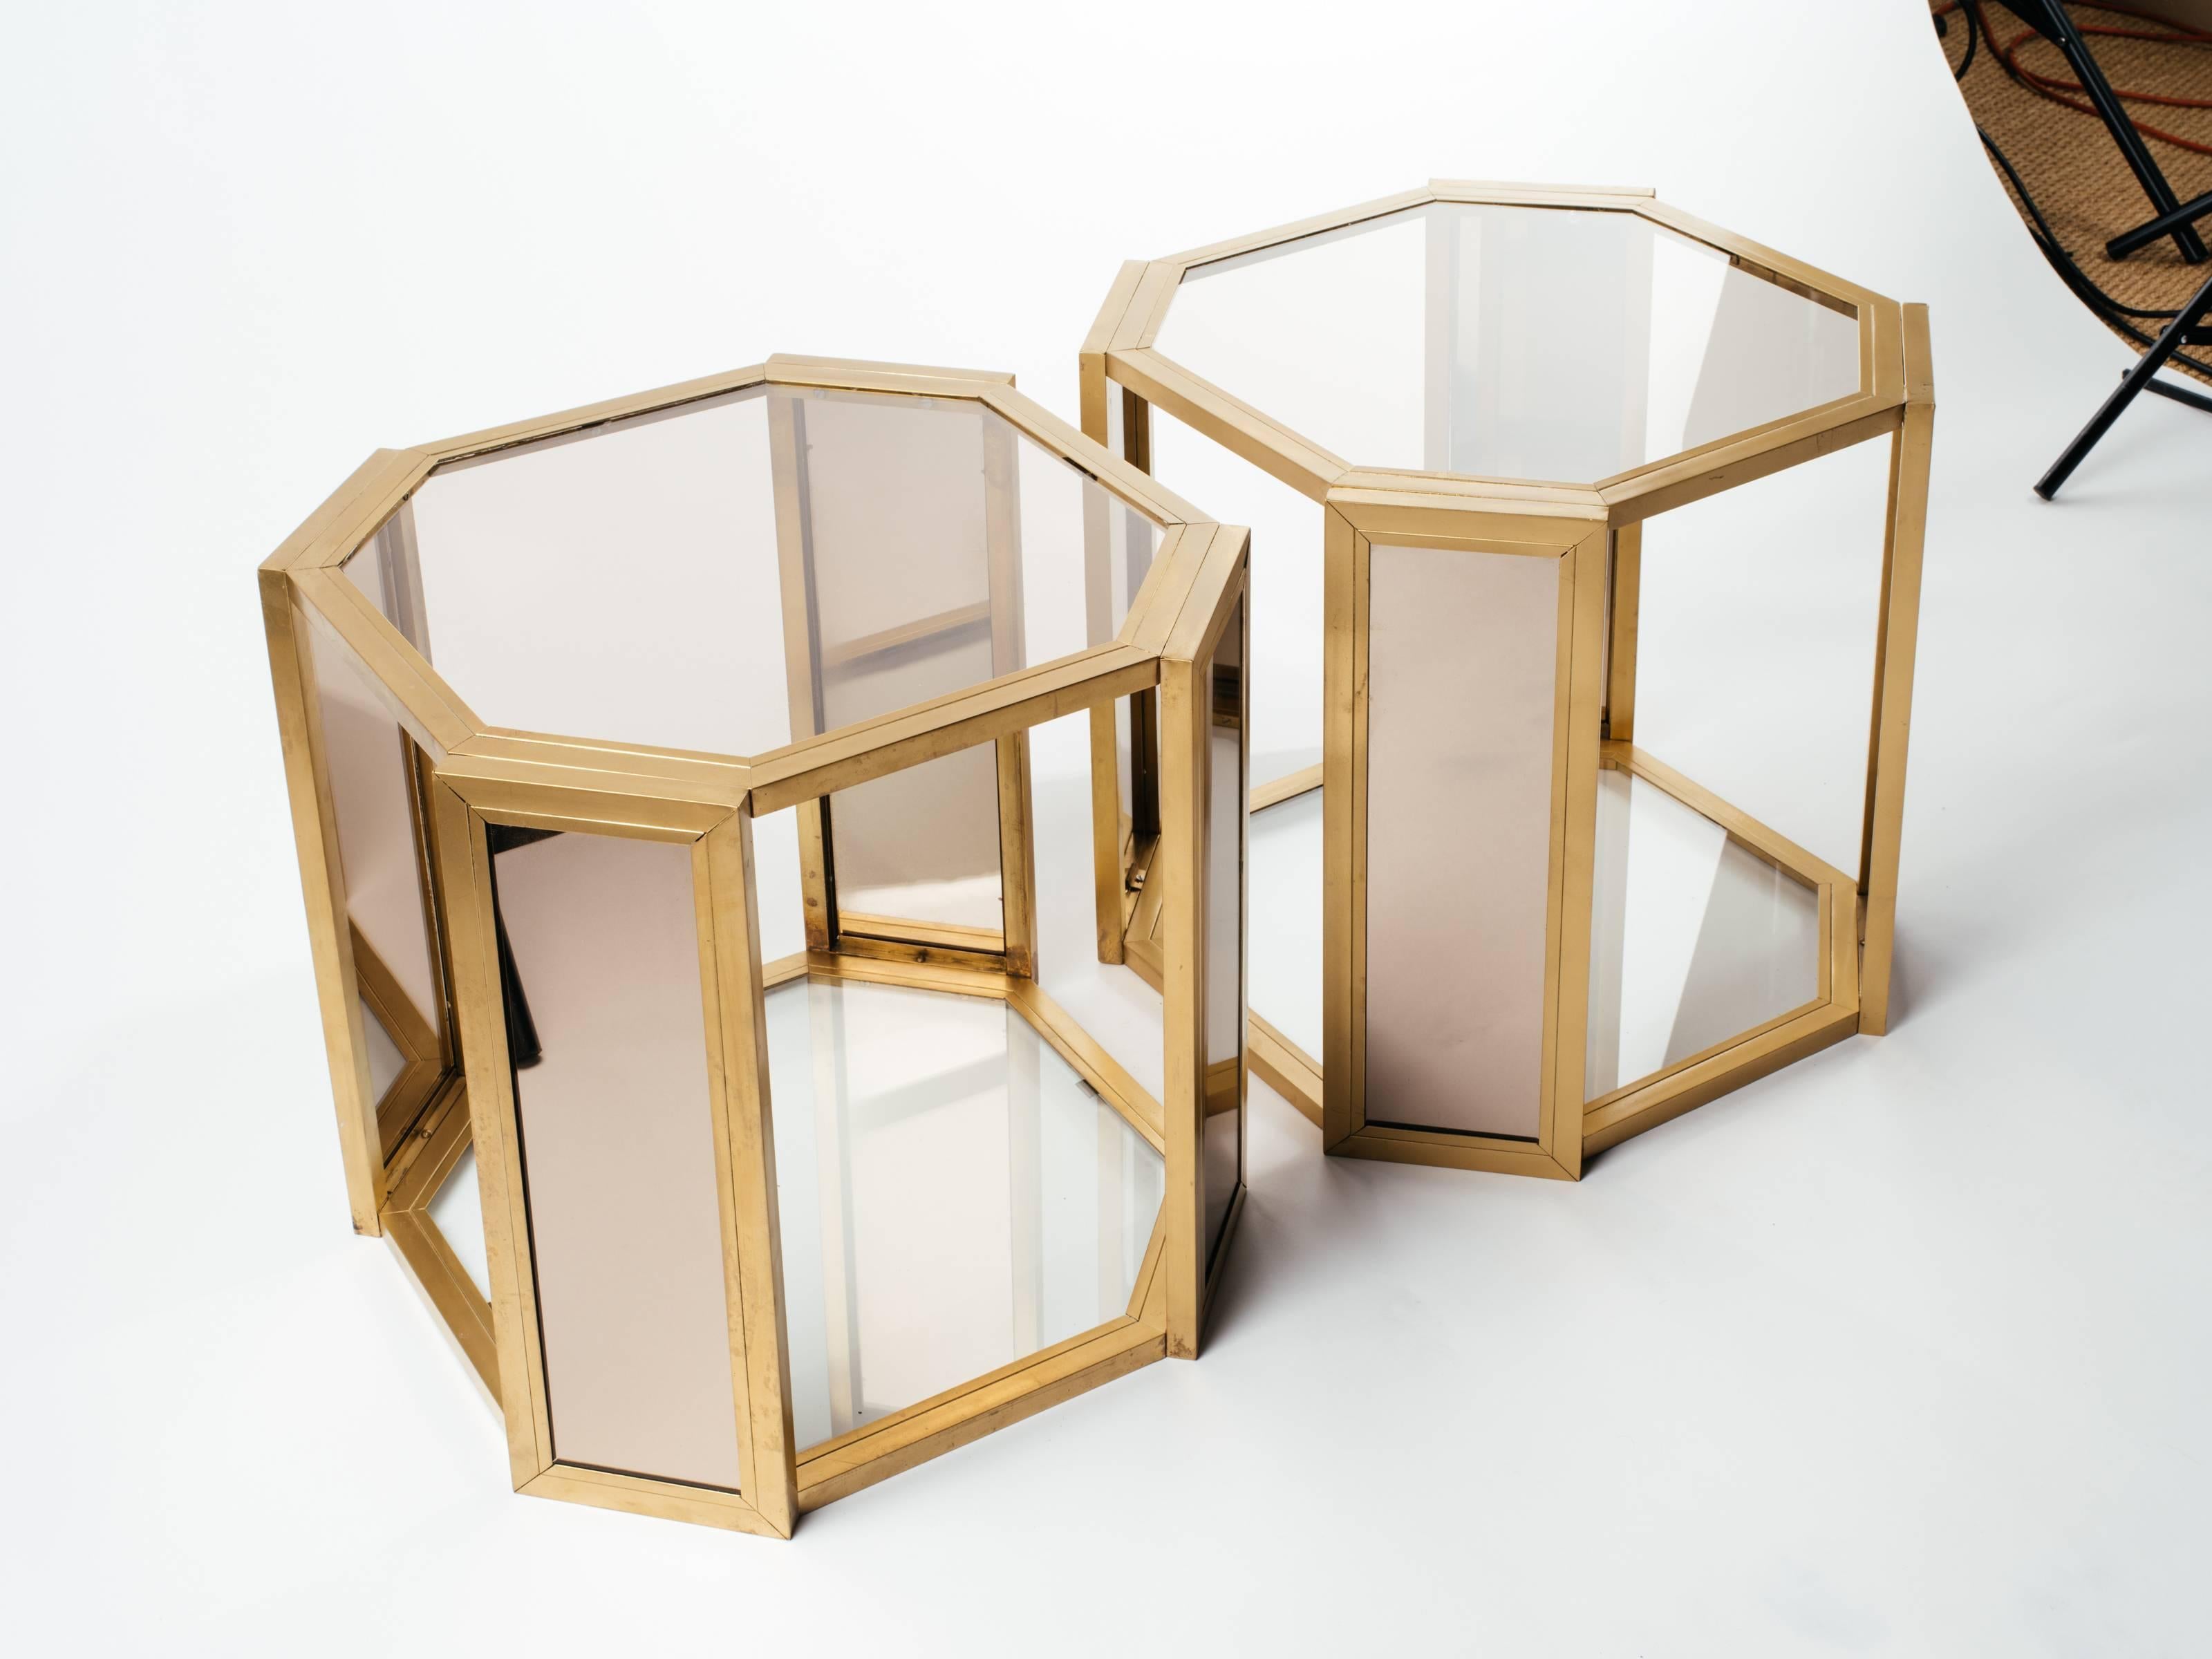 American Pair of Hexagon Two Tier Side Tables in Brass and Smoked Glass, c. 1970s For Sale